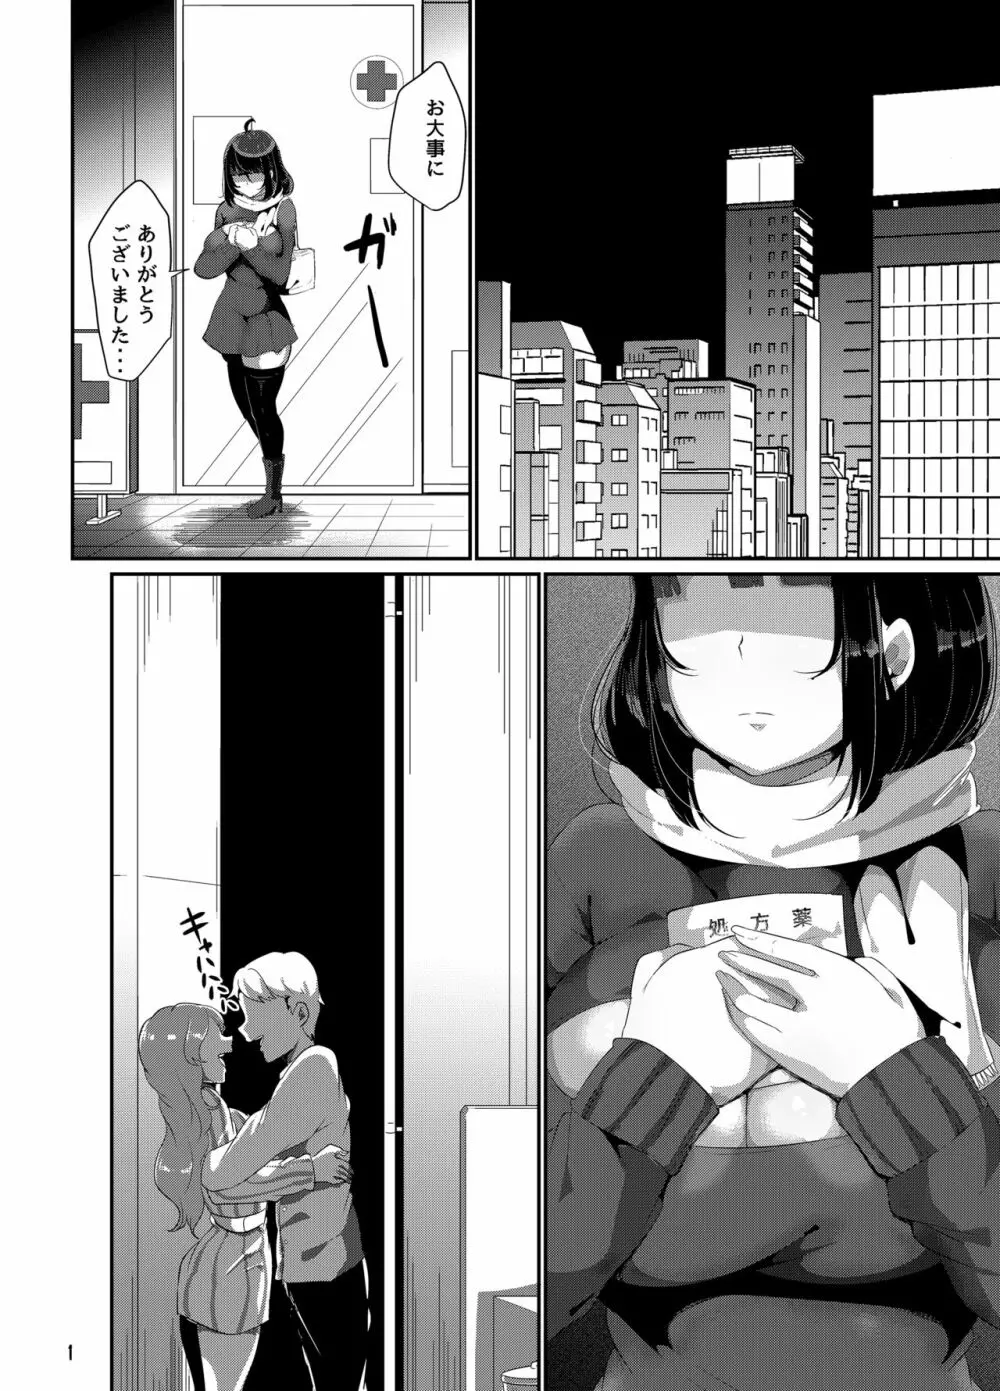 好き好き好き好き好き好き好き好き ver.5 - page2